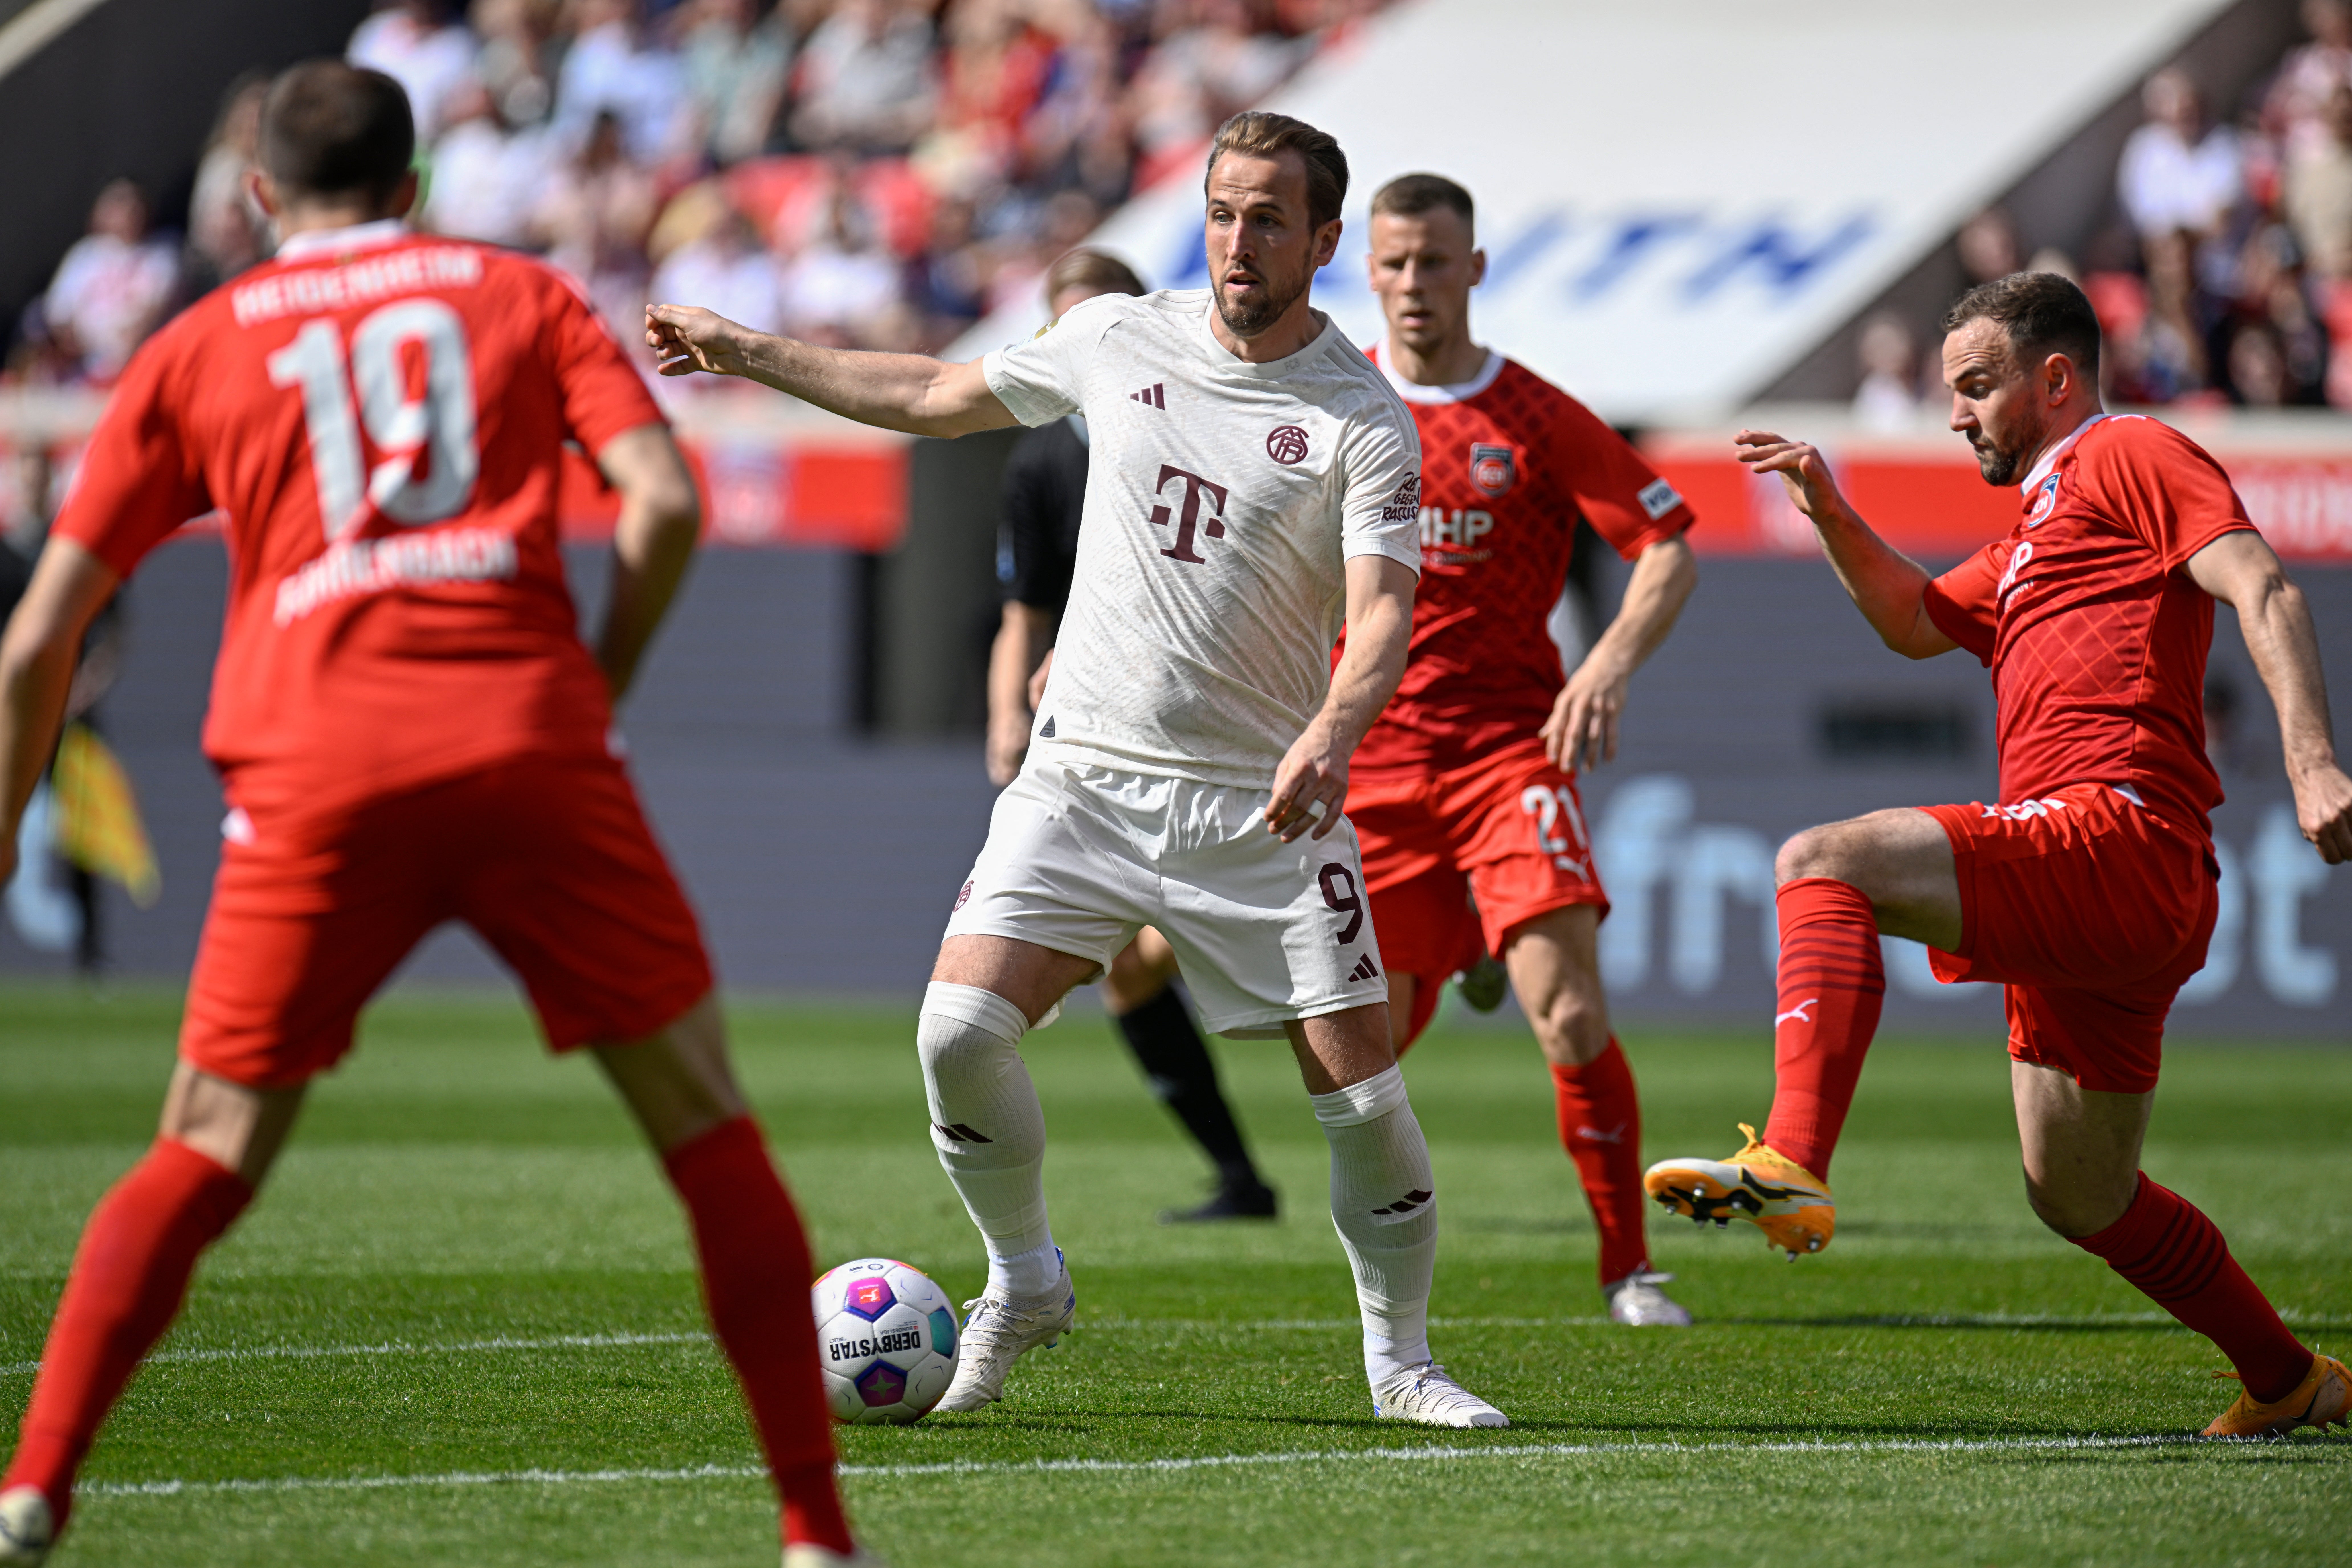 Despite his prolific goalscoring record for Bayern, there is a feeling that Harry Kane joined the Bundesliga champions at the start of their decline